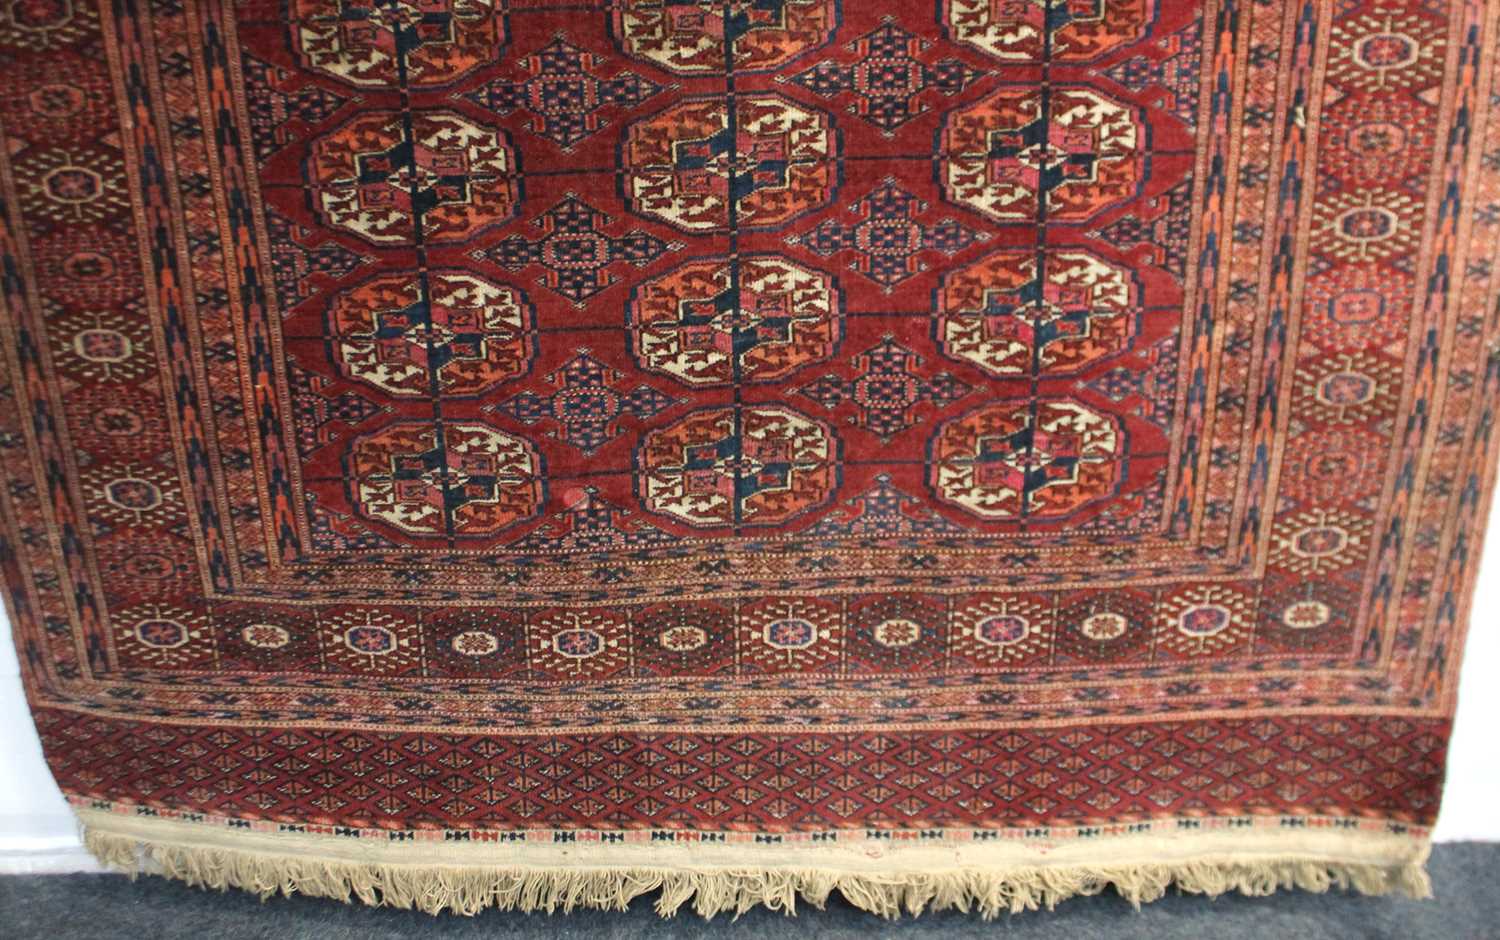 A Bokhara Turkoman type rug, with three rows of guls on red ground, 170cm by 125cm